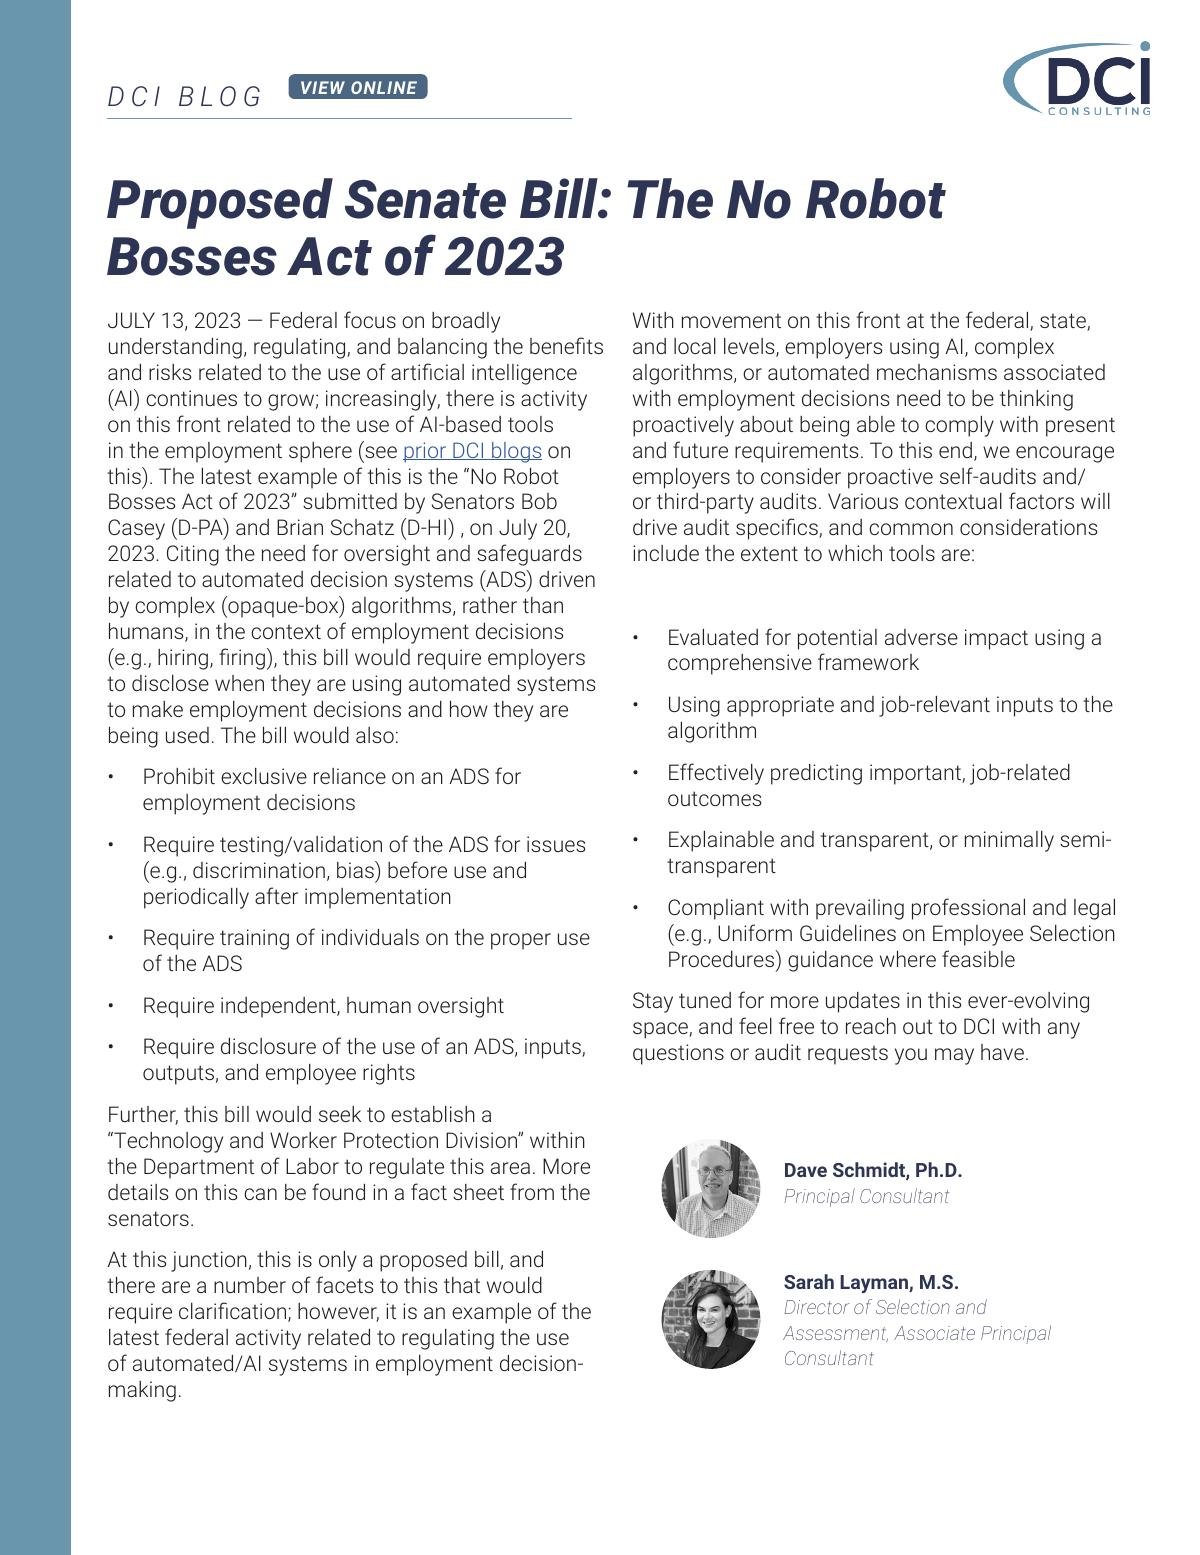 Proposed Senate Bill: The No Robot Bosses Act of 2023